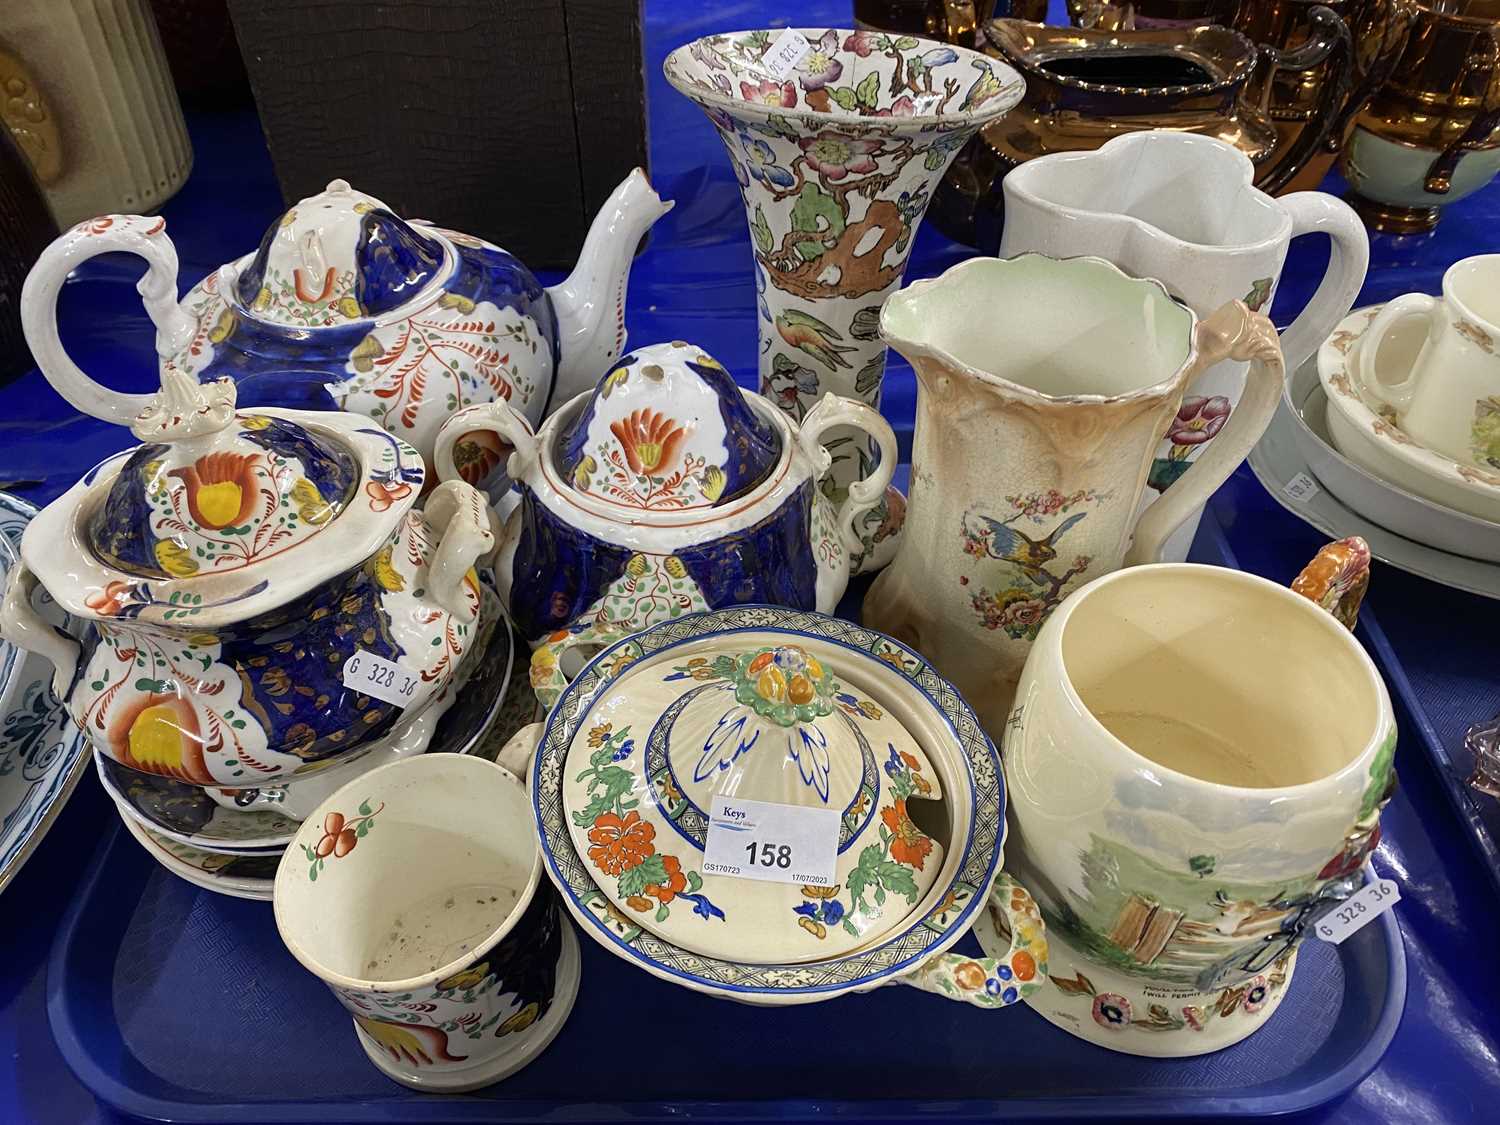 Mixed Lot: 19th Century Staffordshire tea set, various assorted jugs, a musical tankard and other